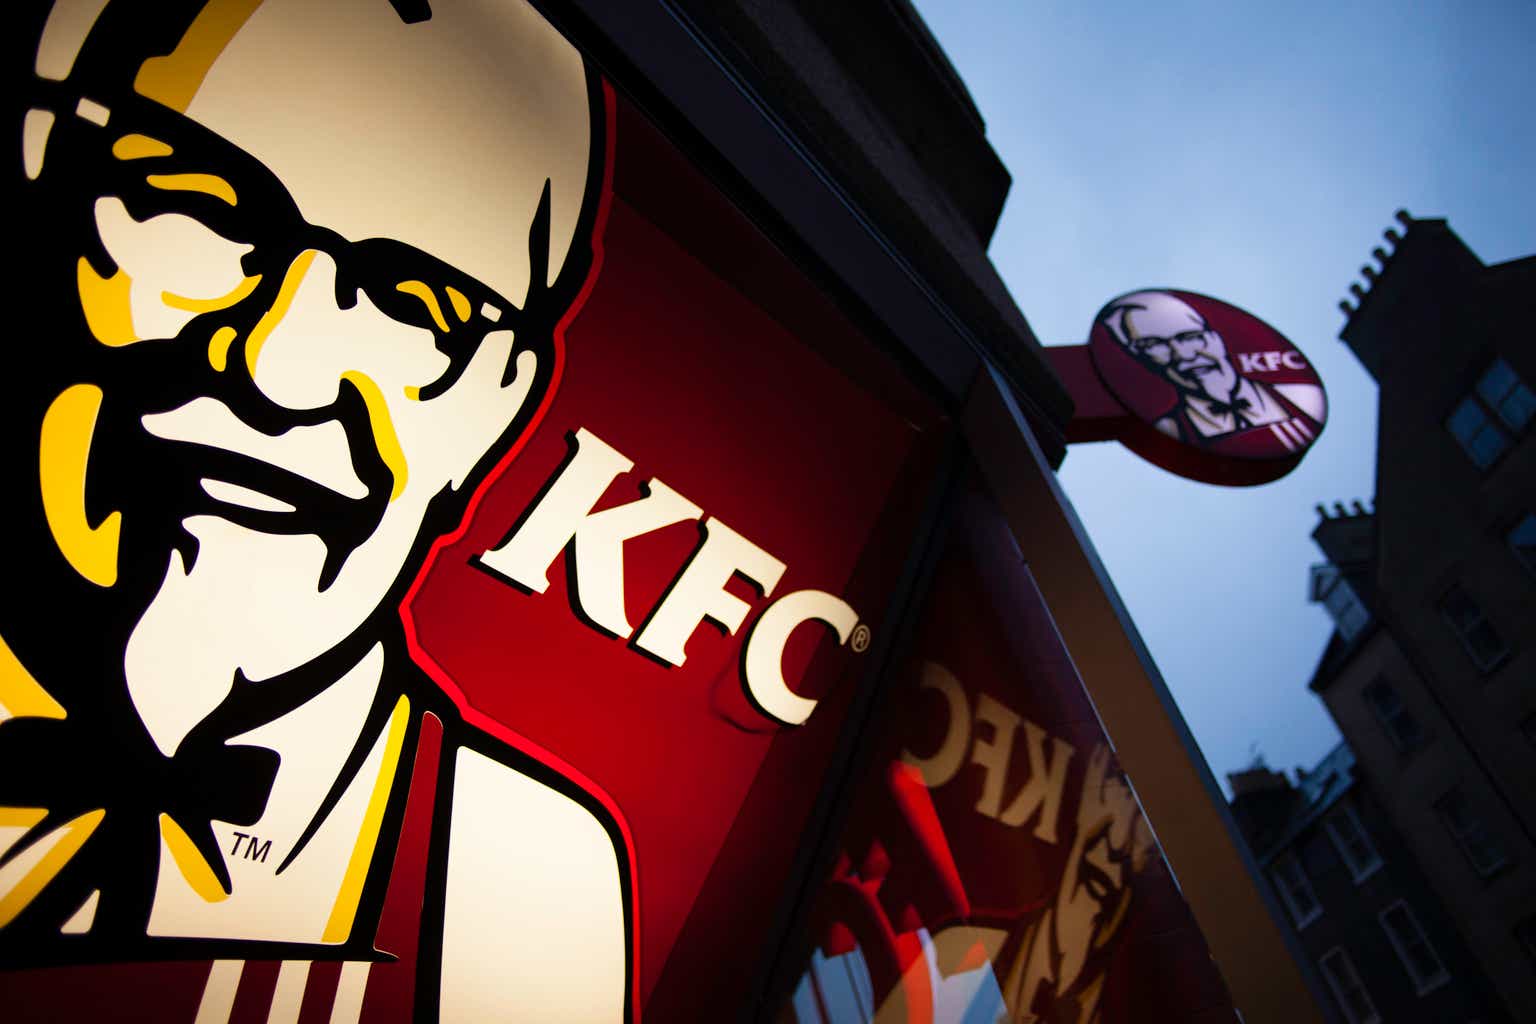 LET THE COUNTDOWN BEGIN! KFC WRAPS ARE BACK STARTING NOV. 12 AT 2 FOR $5